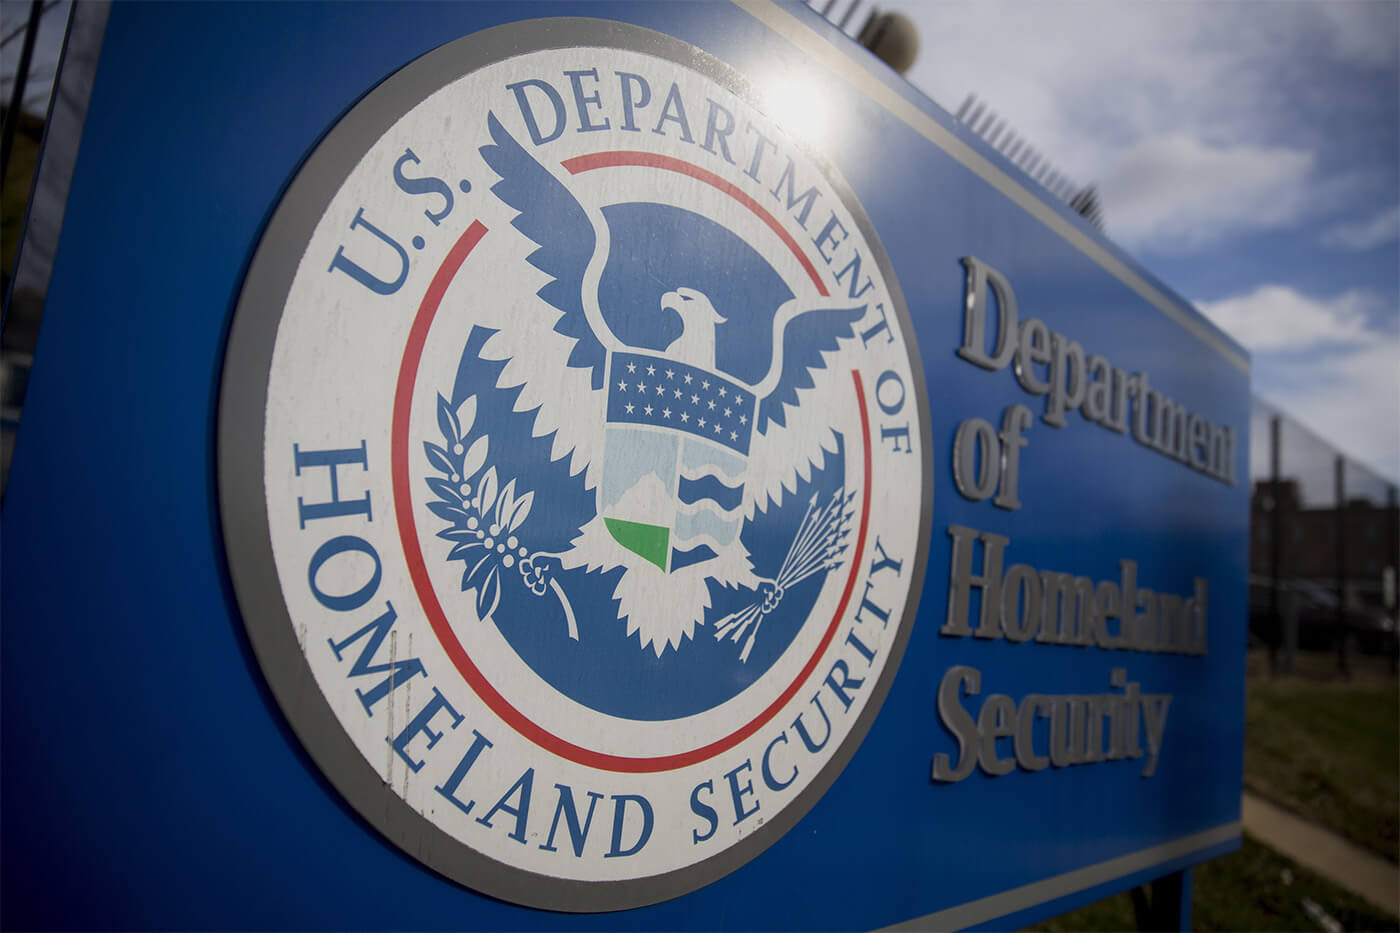 A U.S. Department of Homeland Security (DHS) sign stands at the agency's headquarters in Washington, D.C., U.S., on Thursday, Dec. 11, 2014. The U.S. House is set to pass a $1.1 trillion spending bill that includes a banking provision opposed by many Democrats as a giveaway to large institutions. Current funding for the government ends today, and the measure would finance most of the government through September 2015. The DHS, responsible for immigration policy, would be financed only through Feb. 27. Photographer: Andrew Harrer/Bloomberg via Getty Images